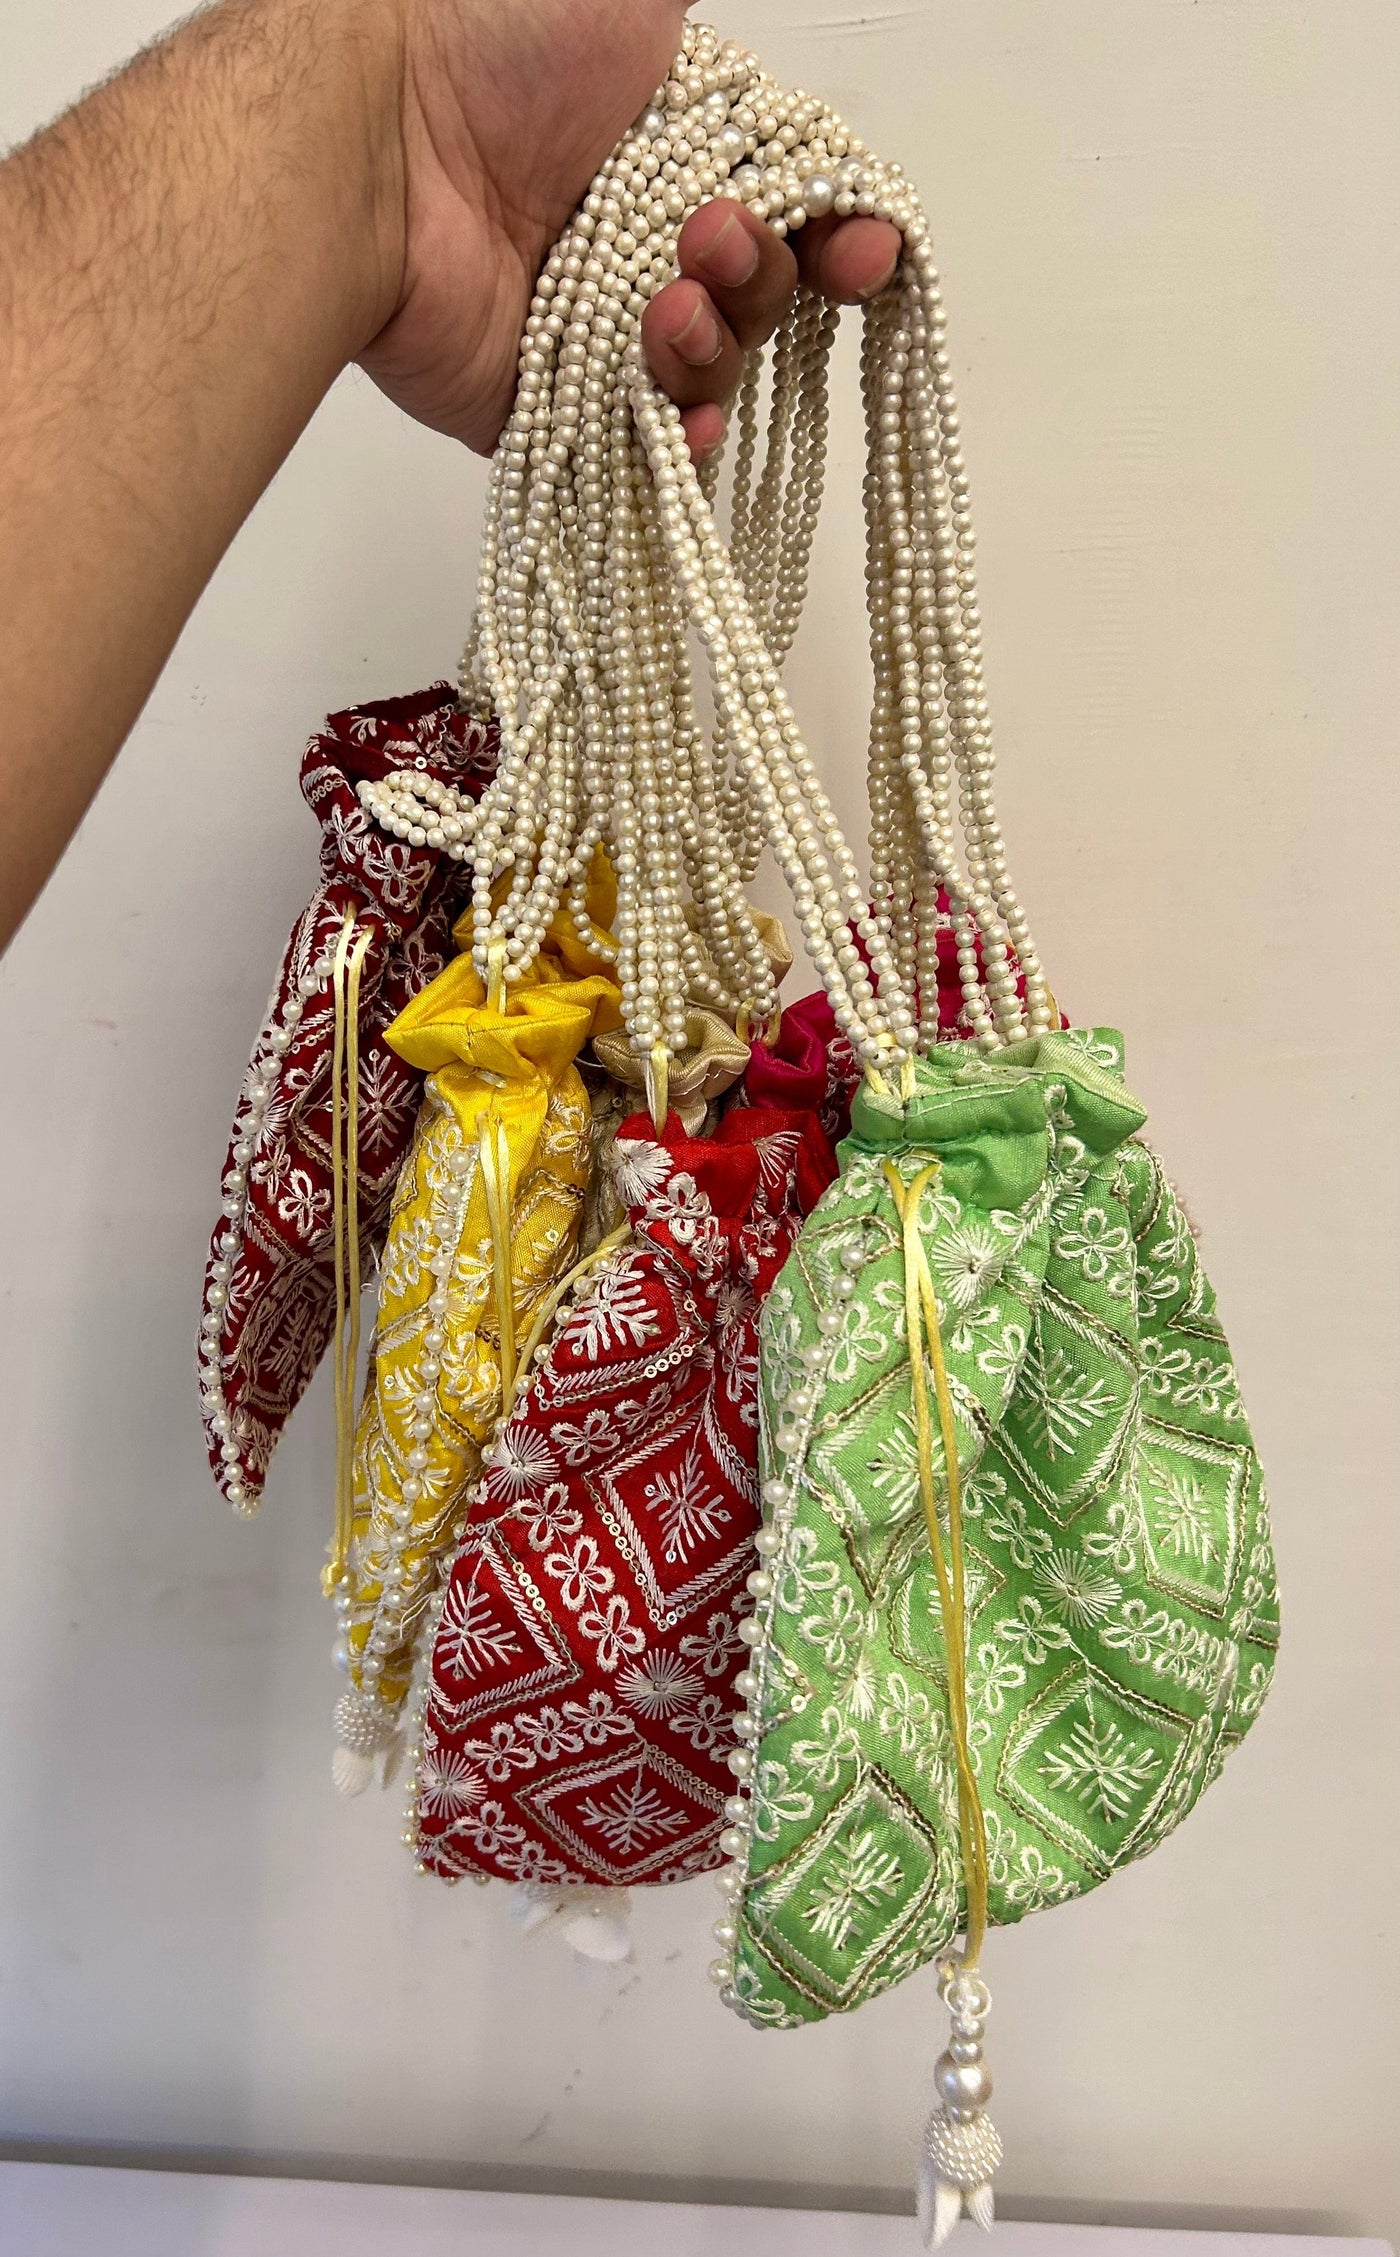 100 Rs each on buying 🏷50+ qty | Call 📞 at 8619550223 Women's Potli Bag Designer Embroidered potli bags for wedding favours 🎁 and giveaways to bridesmaids in haldi Mehendi ceremony